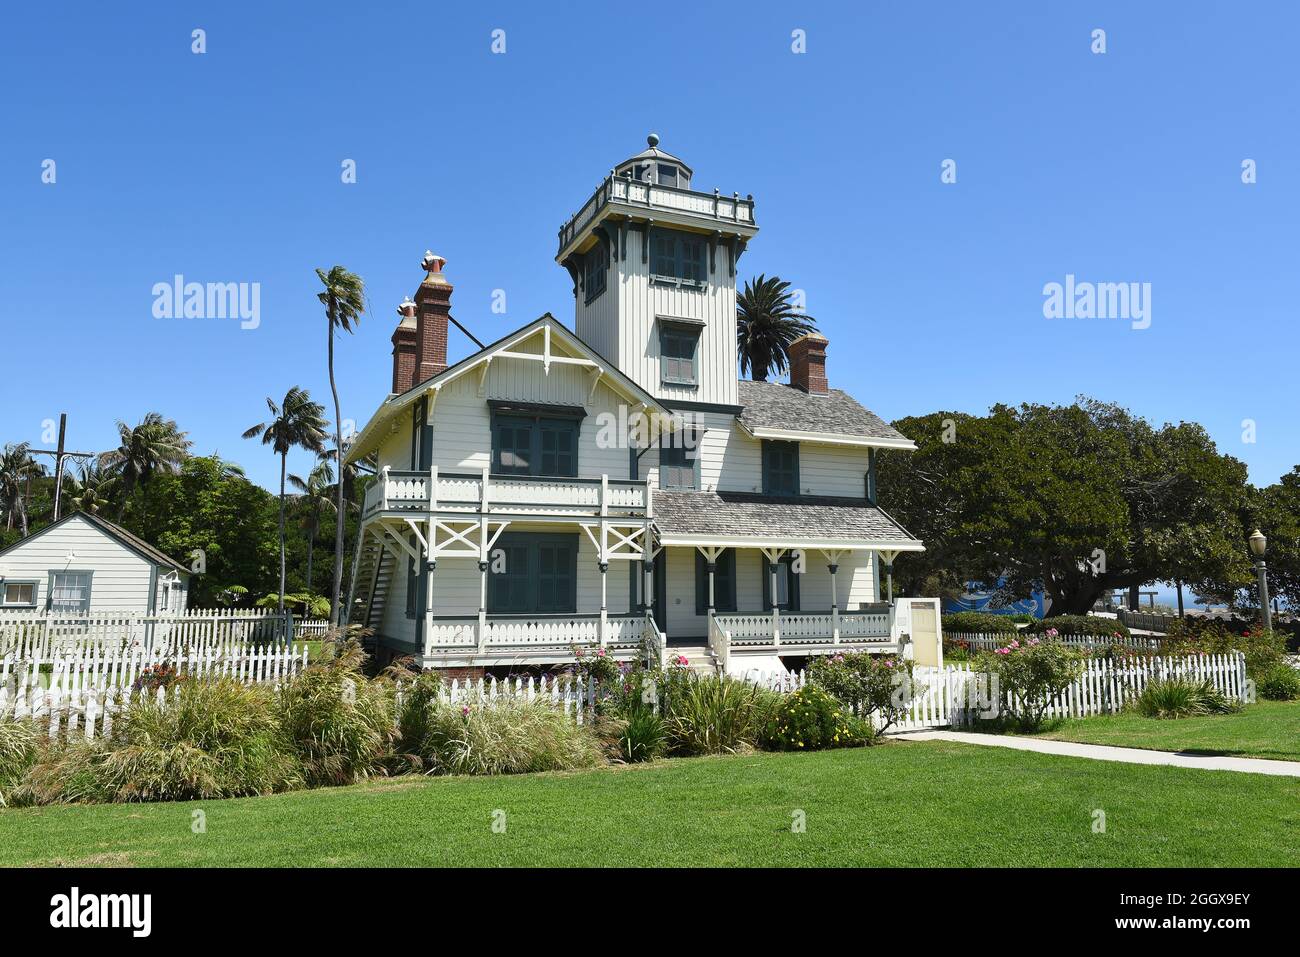 SAN PEDRO, CALIFORNIA - 27 AUG 2021: The Point Fermin Lighthouse, a Stick Style Victorian building designed by Paul Pelz. Stock Photo